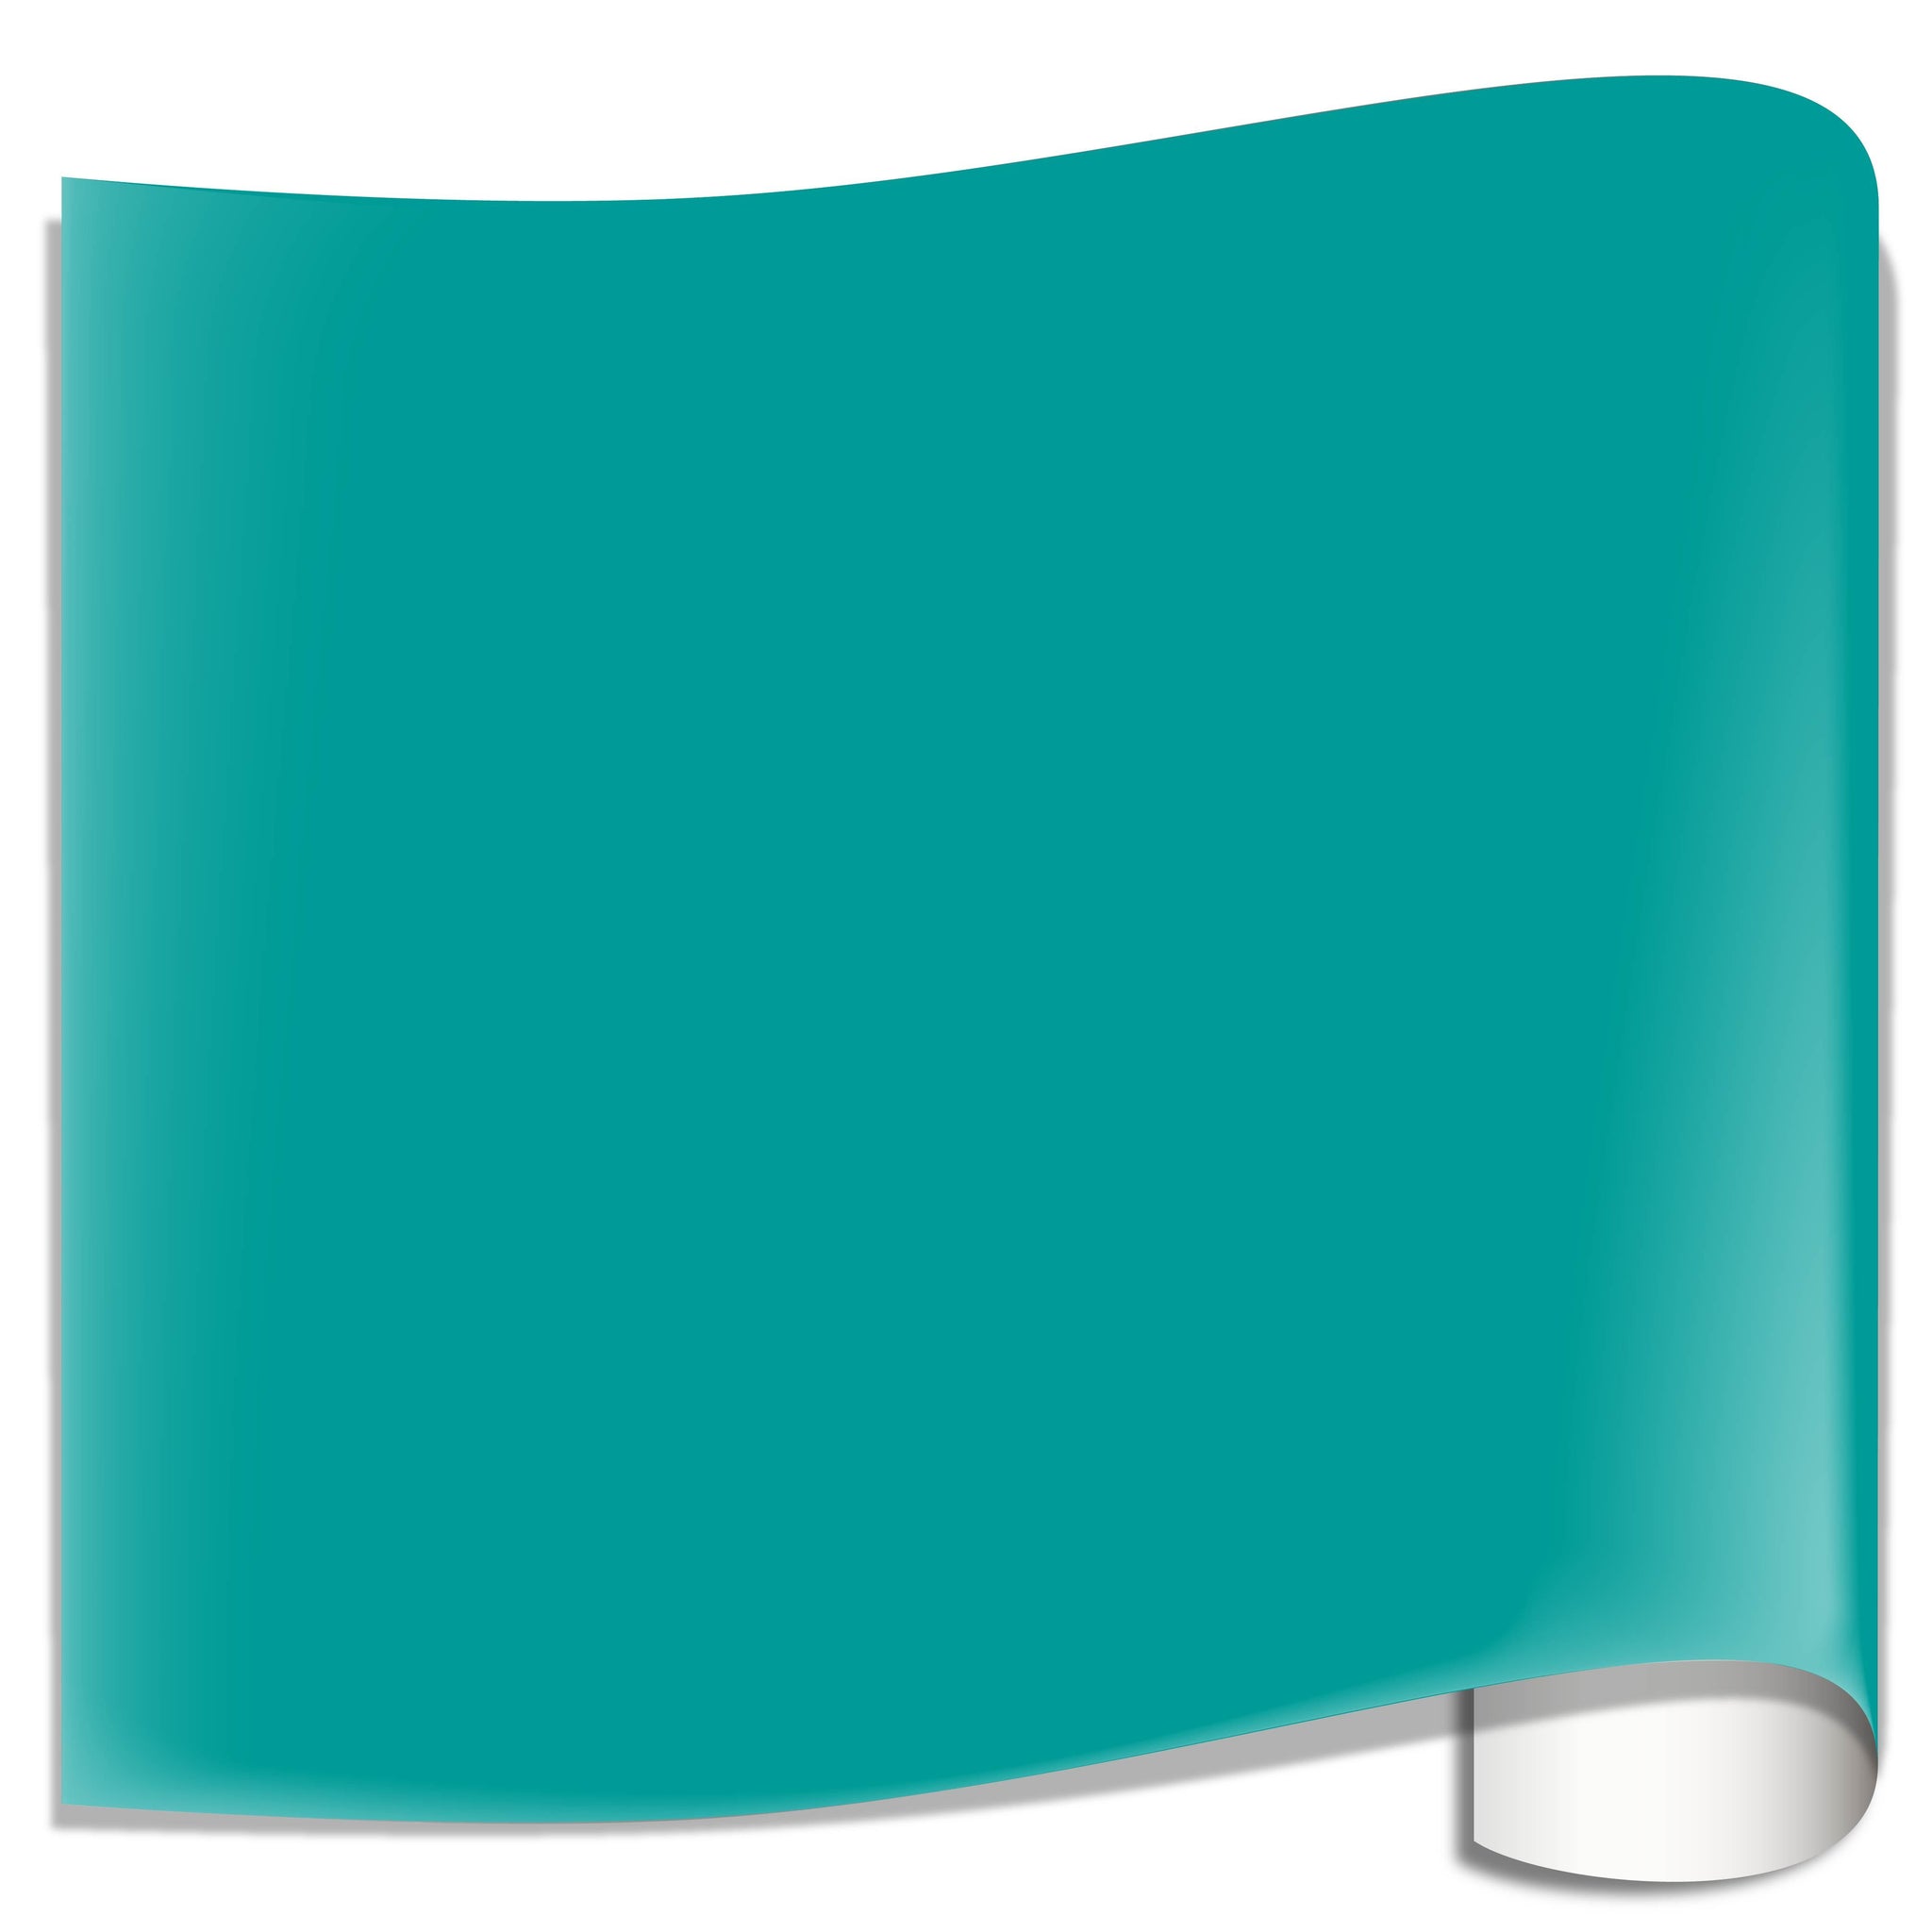 ORACAL® 651 Turquoise Blue Craft Vinyl, Craft Sheets